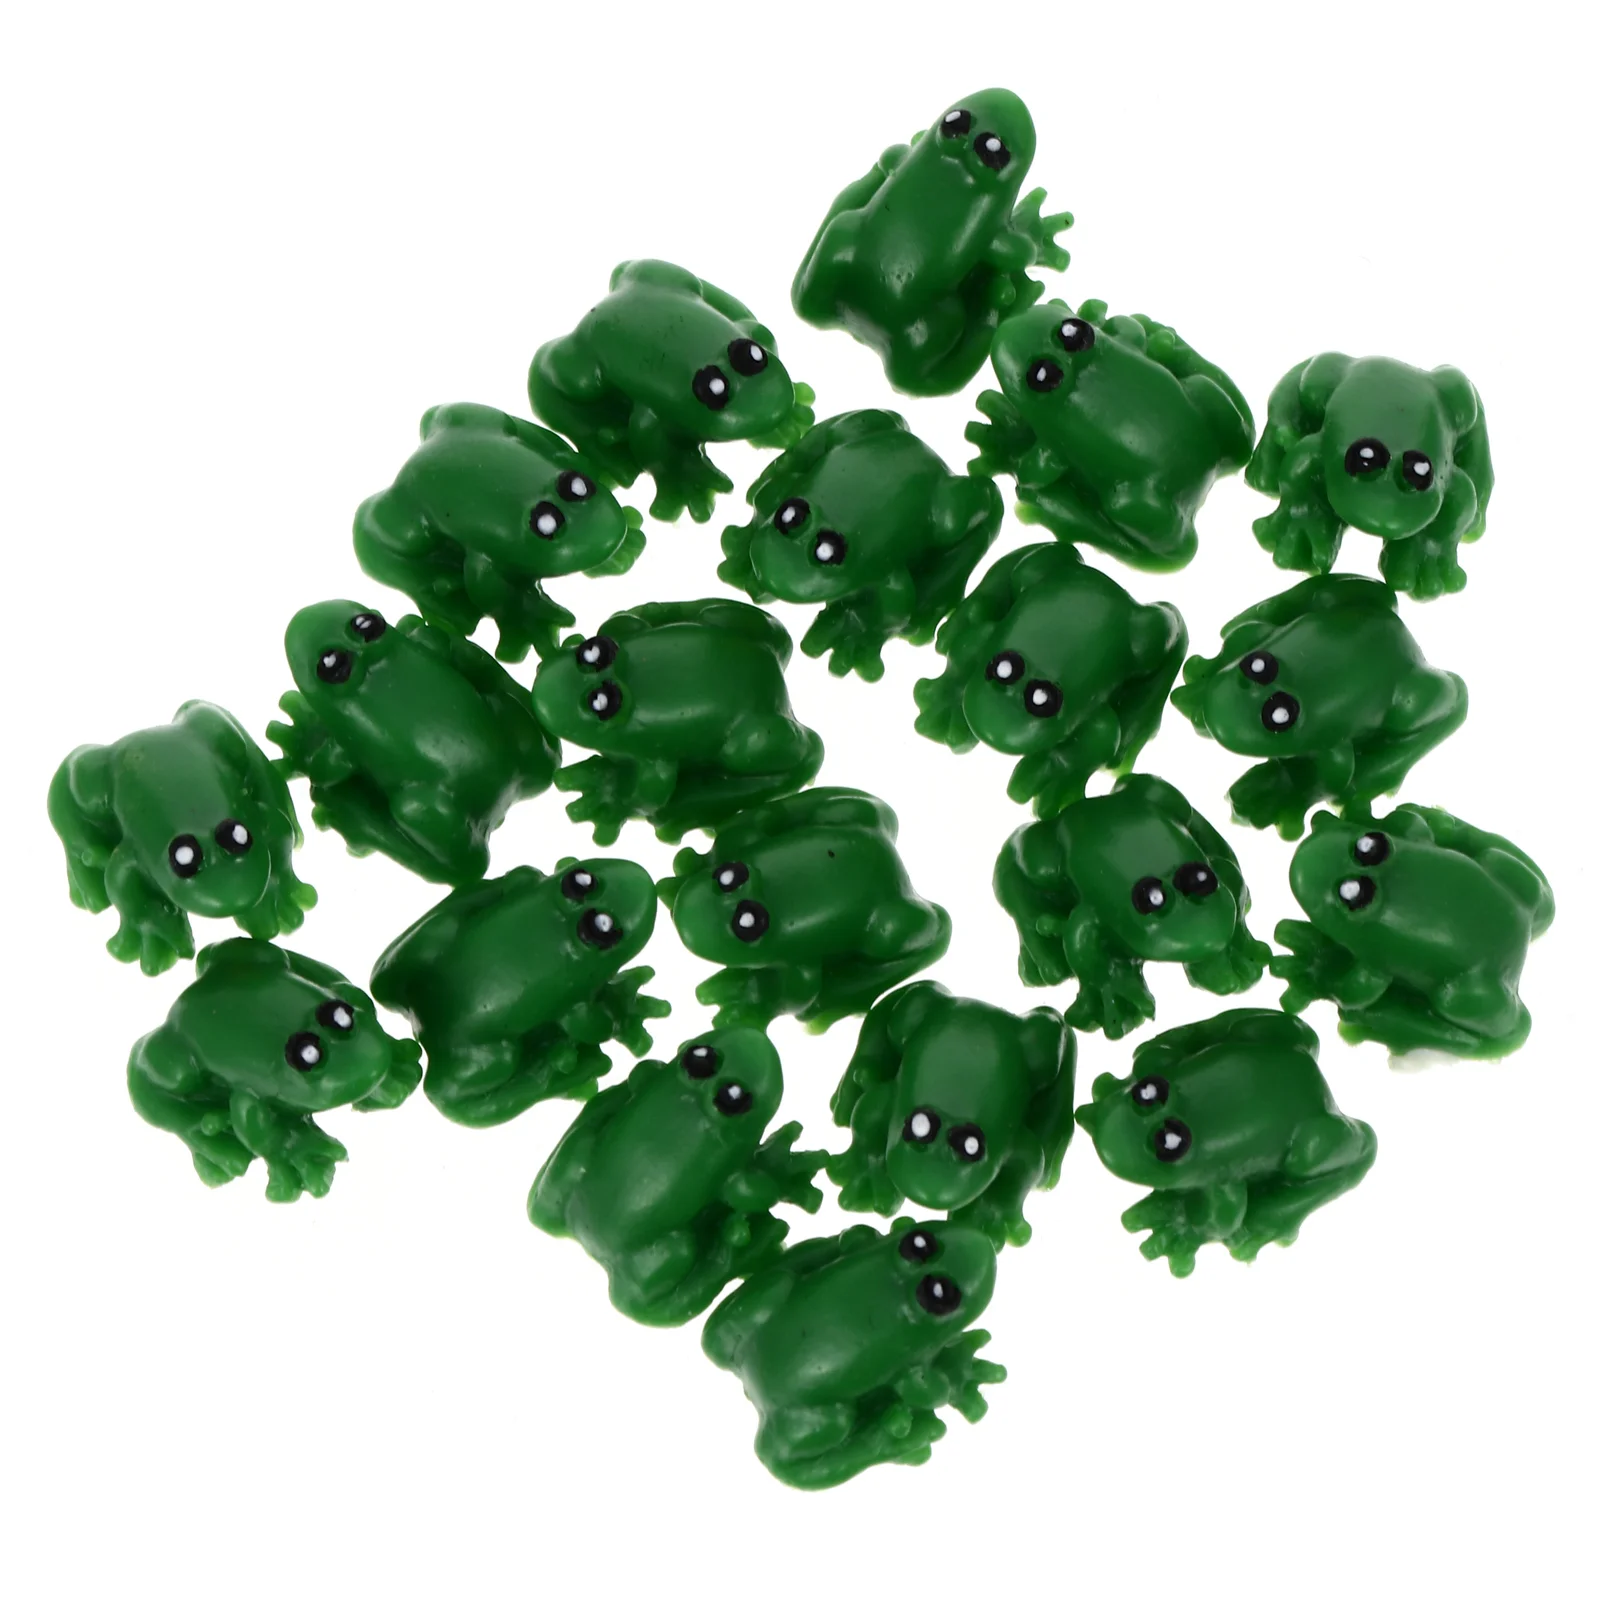 

20 Pcs Resin Frog Frogs Ornament Tabletop Adornment Miniature Miniatures Garden Statue Plastic Outdoor Playsets Micro Landscape